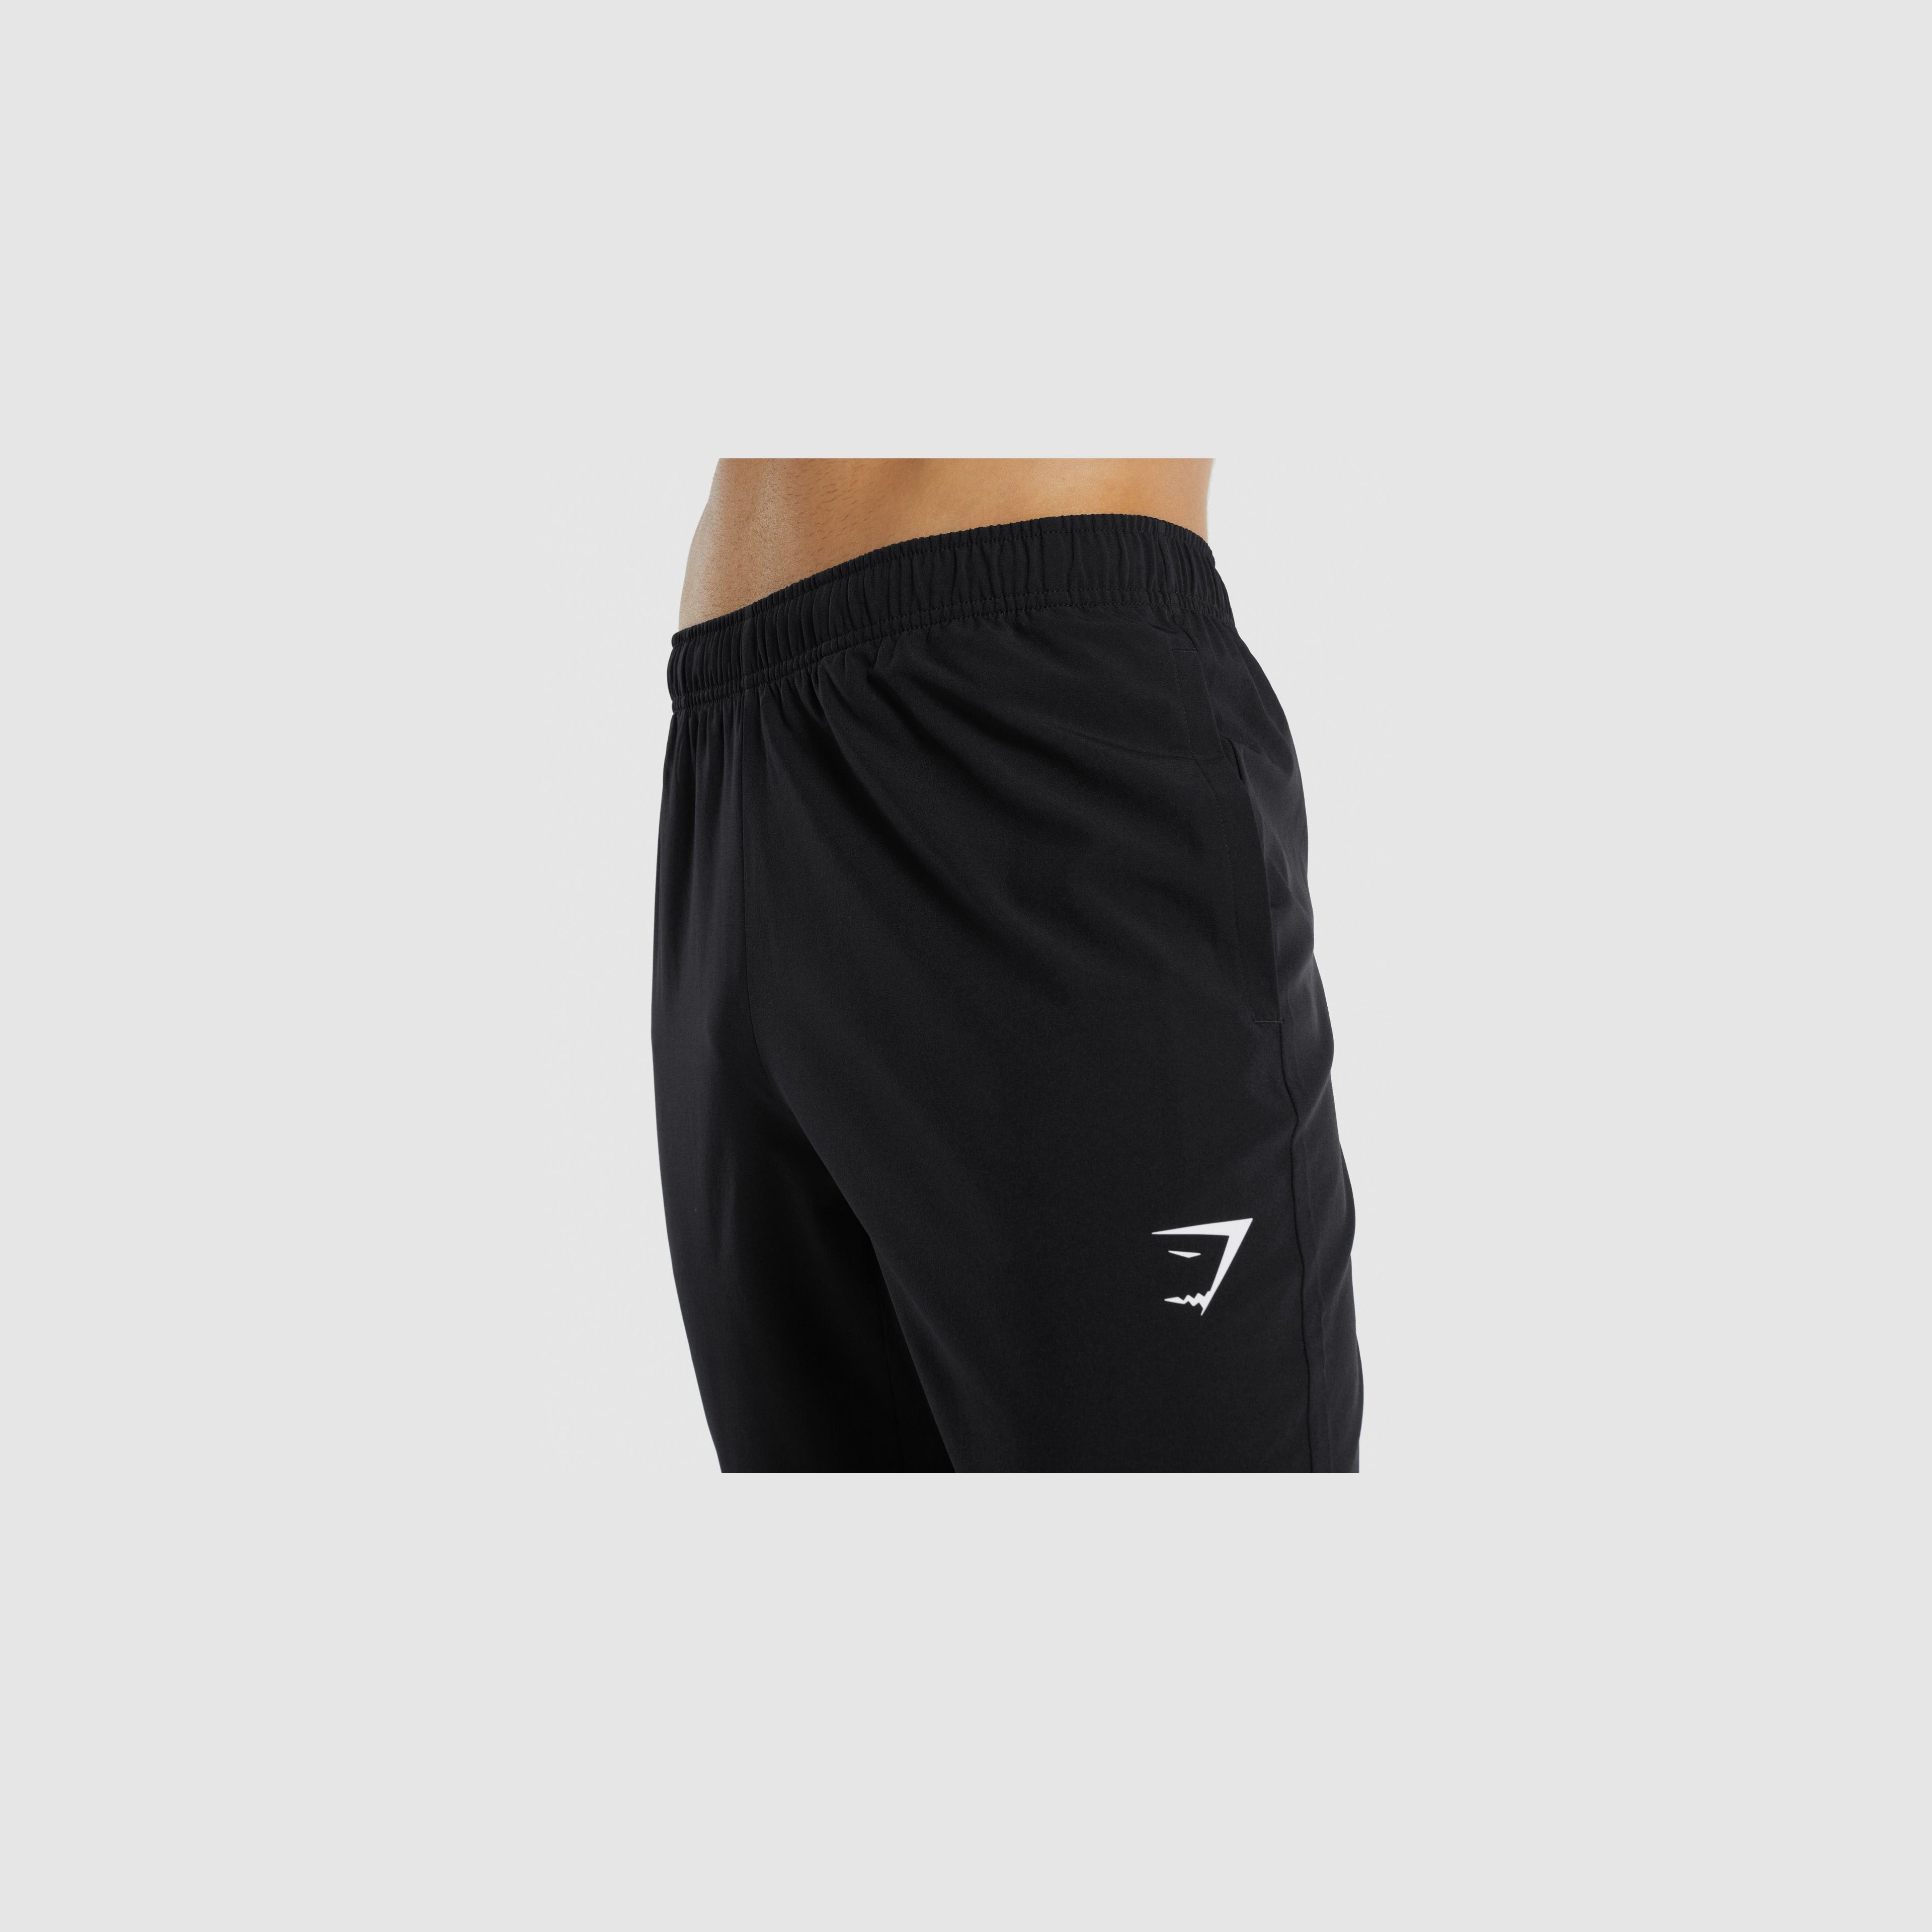 https://cdn.prod.marmalade.co/products/fit-in/3840x3840/filters:quality(80):fill(e6e6e6)/www.gymshark.com%2Fproducts%2Fgymshark-arrival-woven-joggers-black-ss22%2F1644314112%2FARRIVALSLIMWOVENPANT-A1A1X-BBBB-M-AJ3-BLACK.D2-Edit_AS_9d354812-20f7-4bbd-bee3-809dbd0fa1fd.jpg